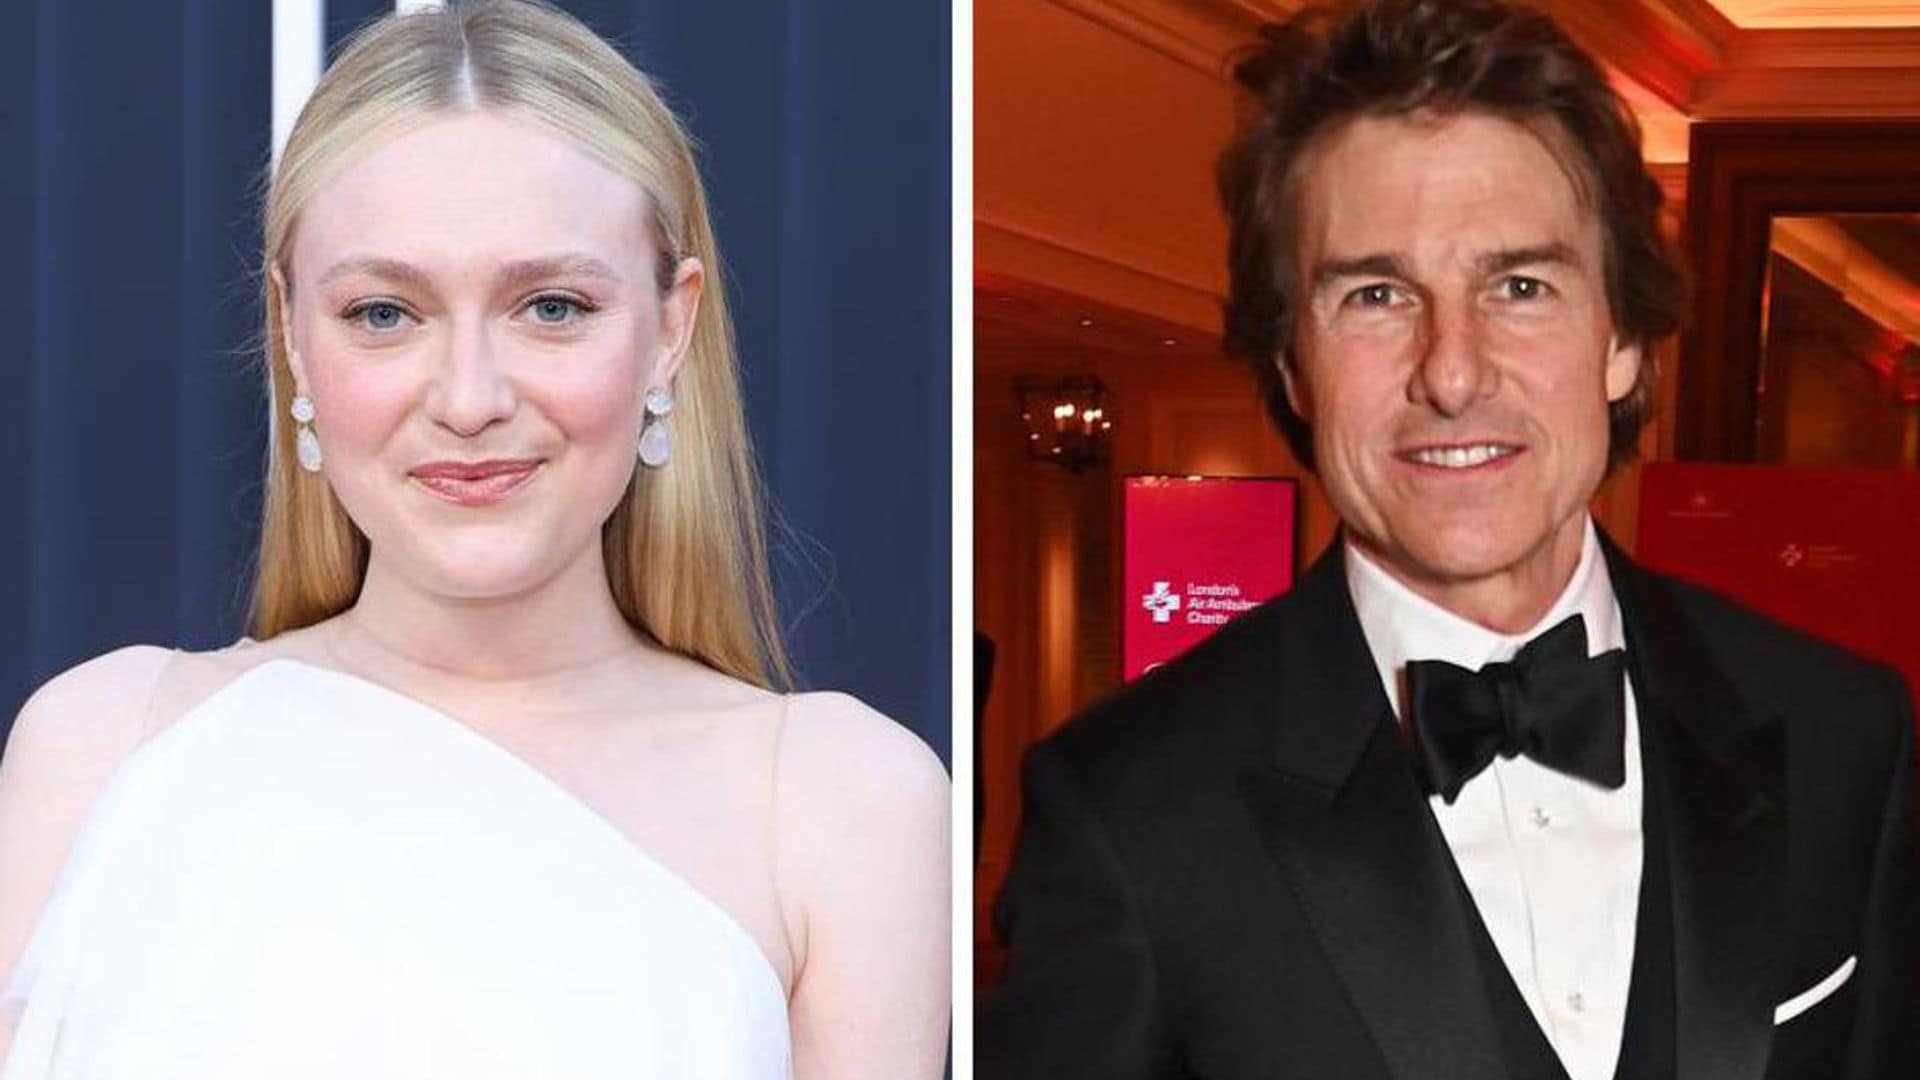 Tom Cruise has given Dakota Fanning a birthday gift every year since she was 11